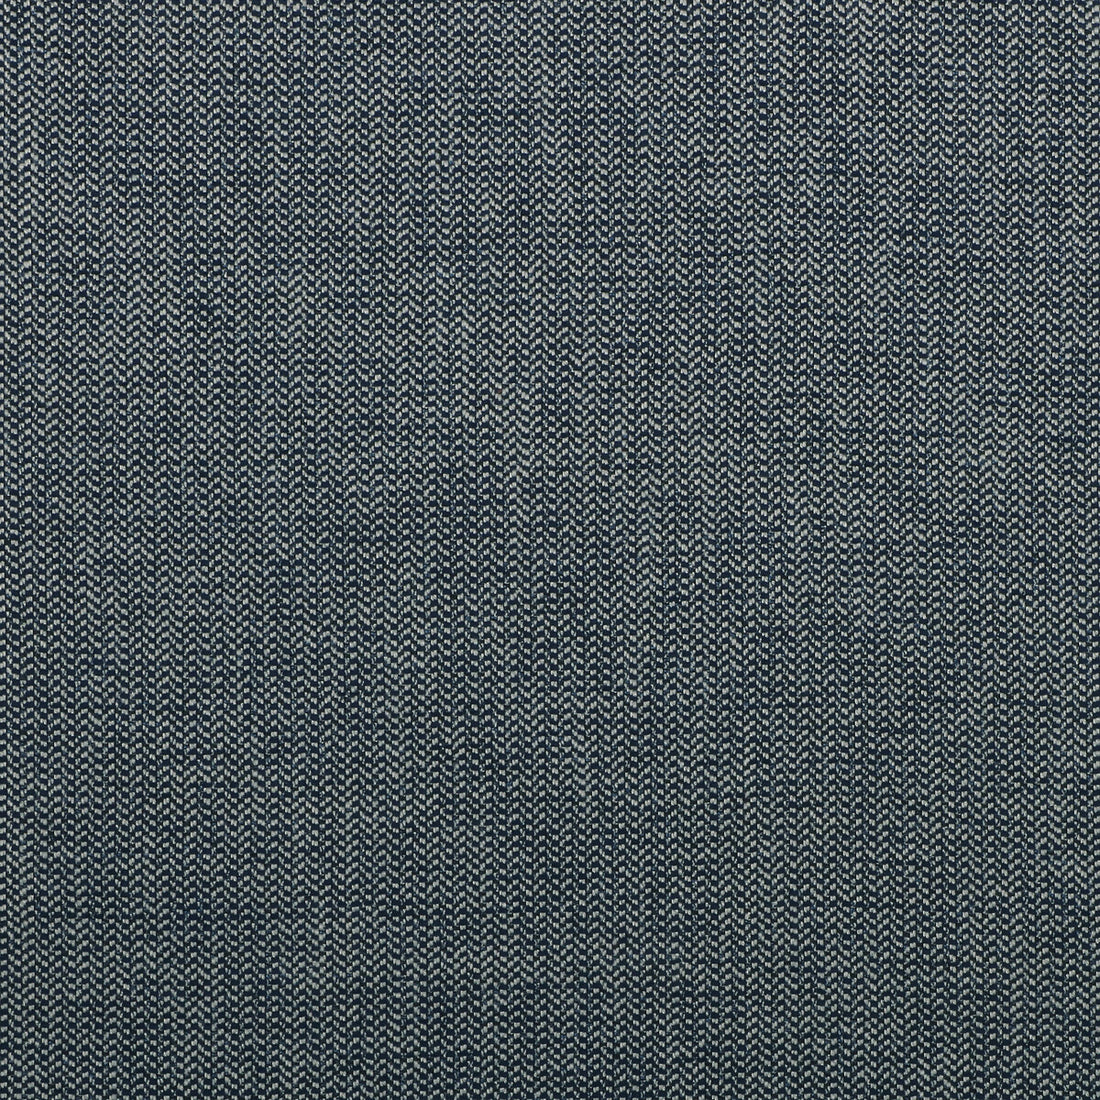 Kravet Smart fabric in 35514-515 color - pattern 35514.515.0 - by Kravet Smart in the Inside Out Performance Fabrics collection